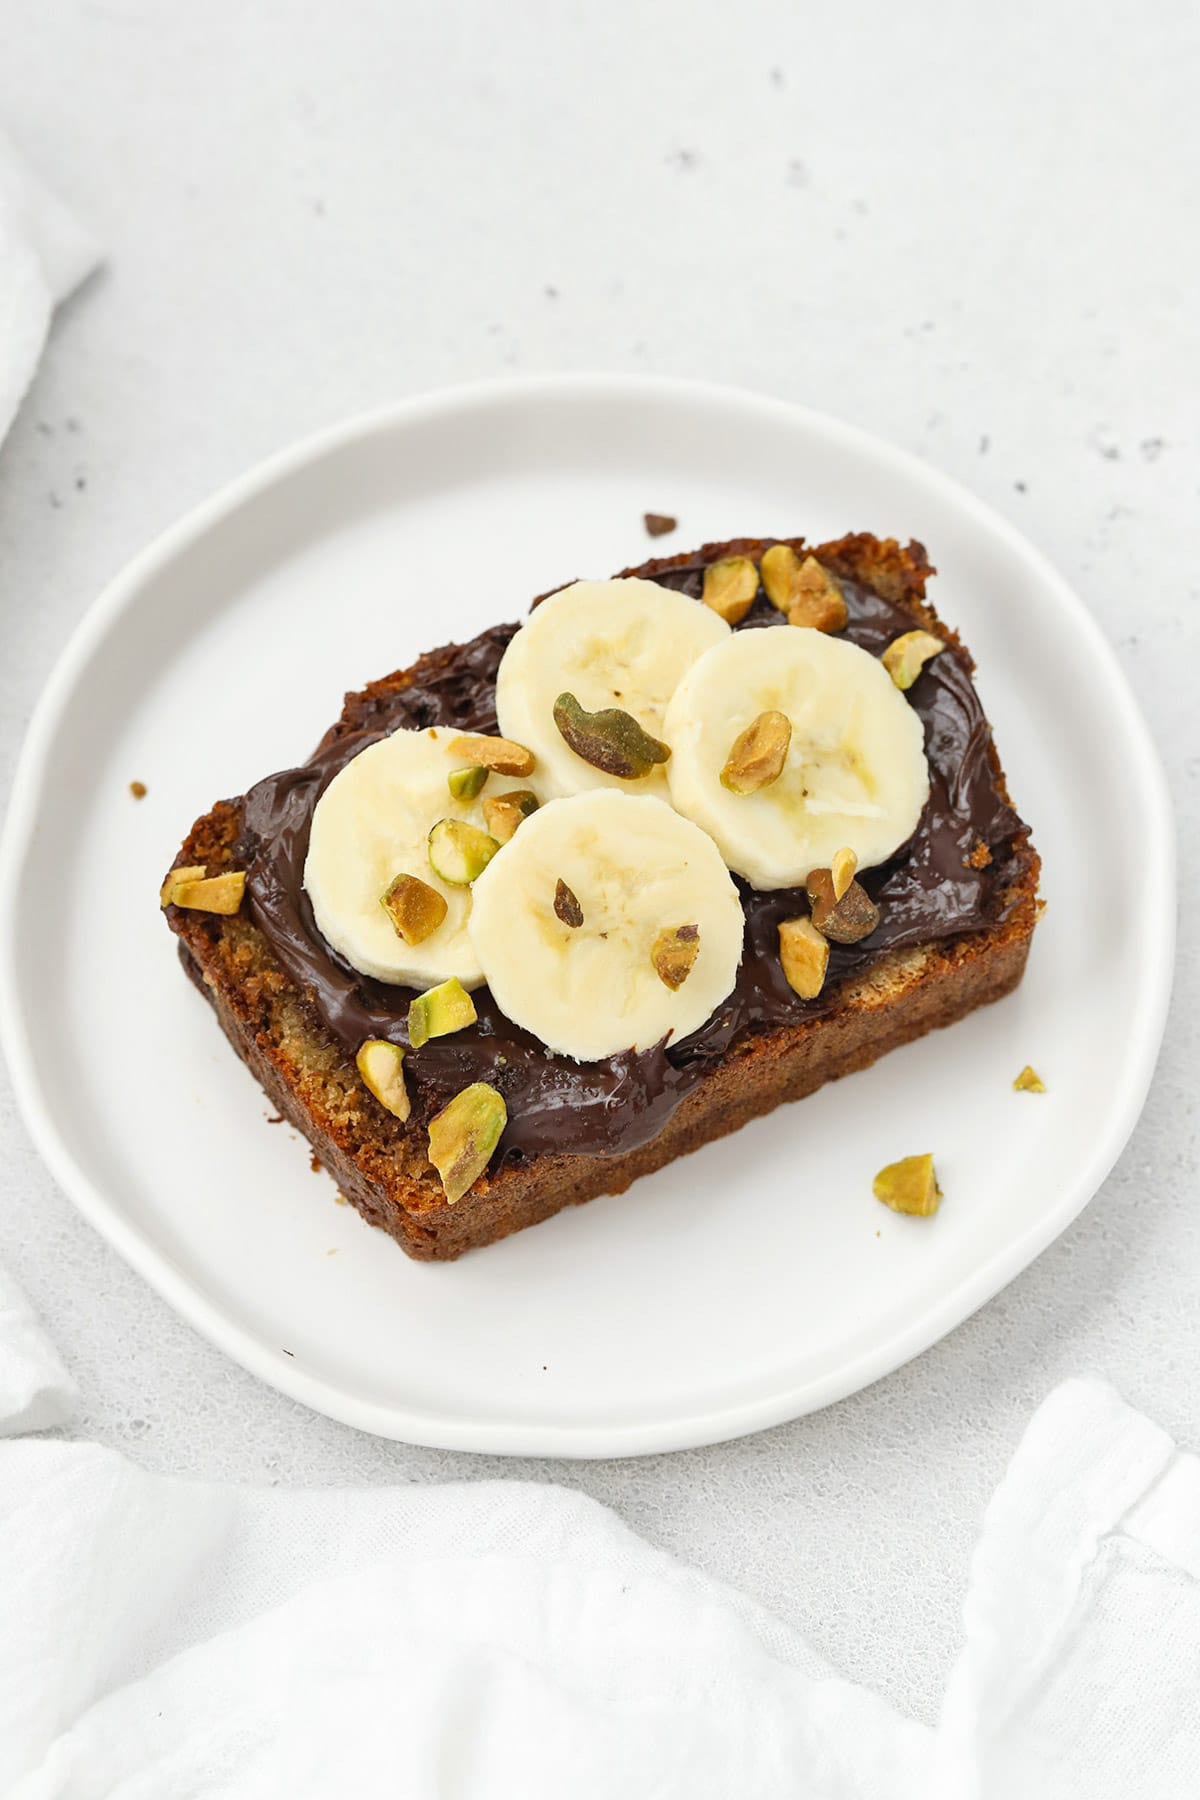 Slice of gluten-free banana bread topped with nutella, sliced bananas, and pistachios